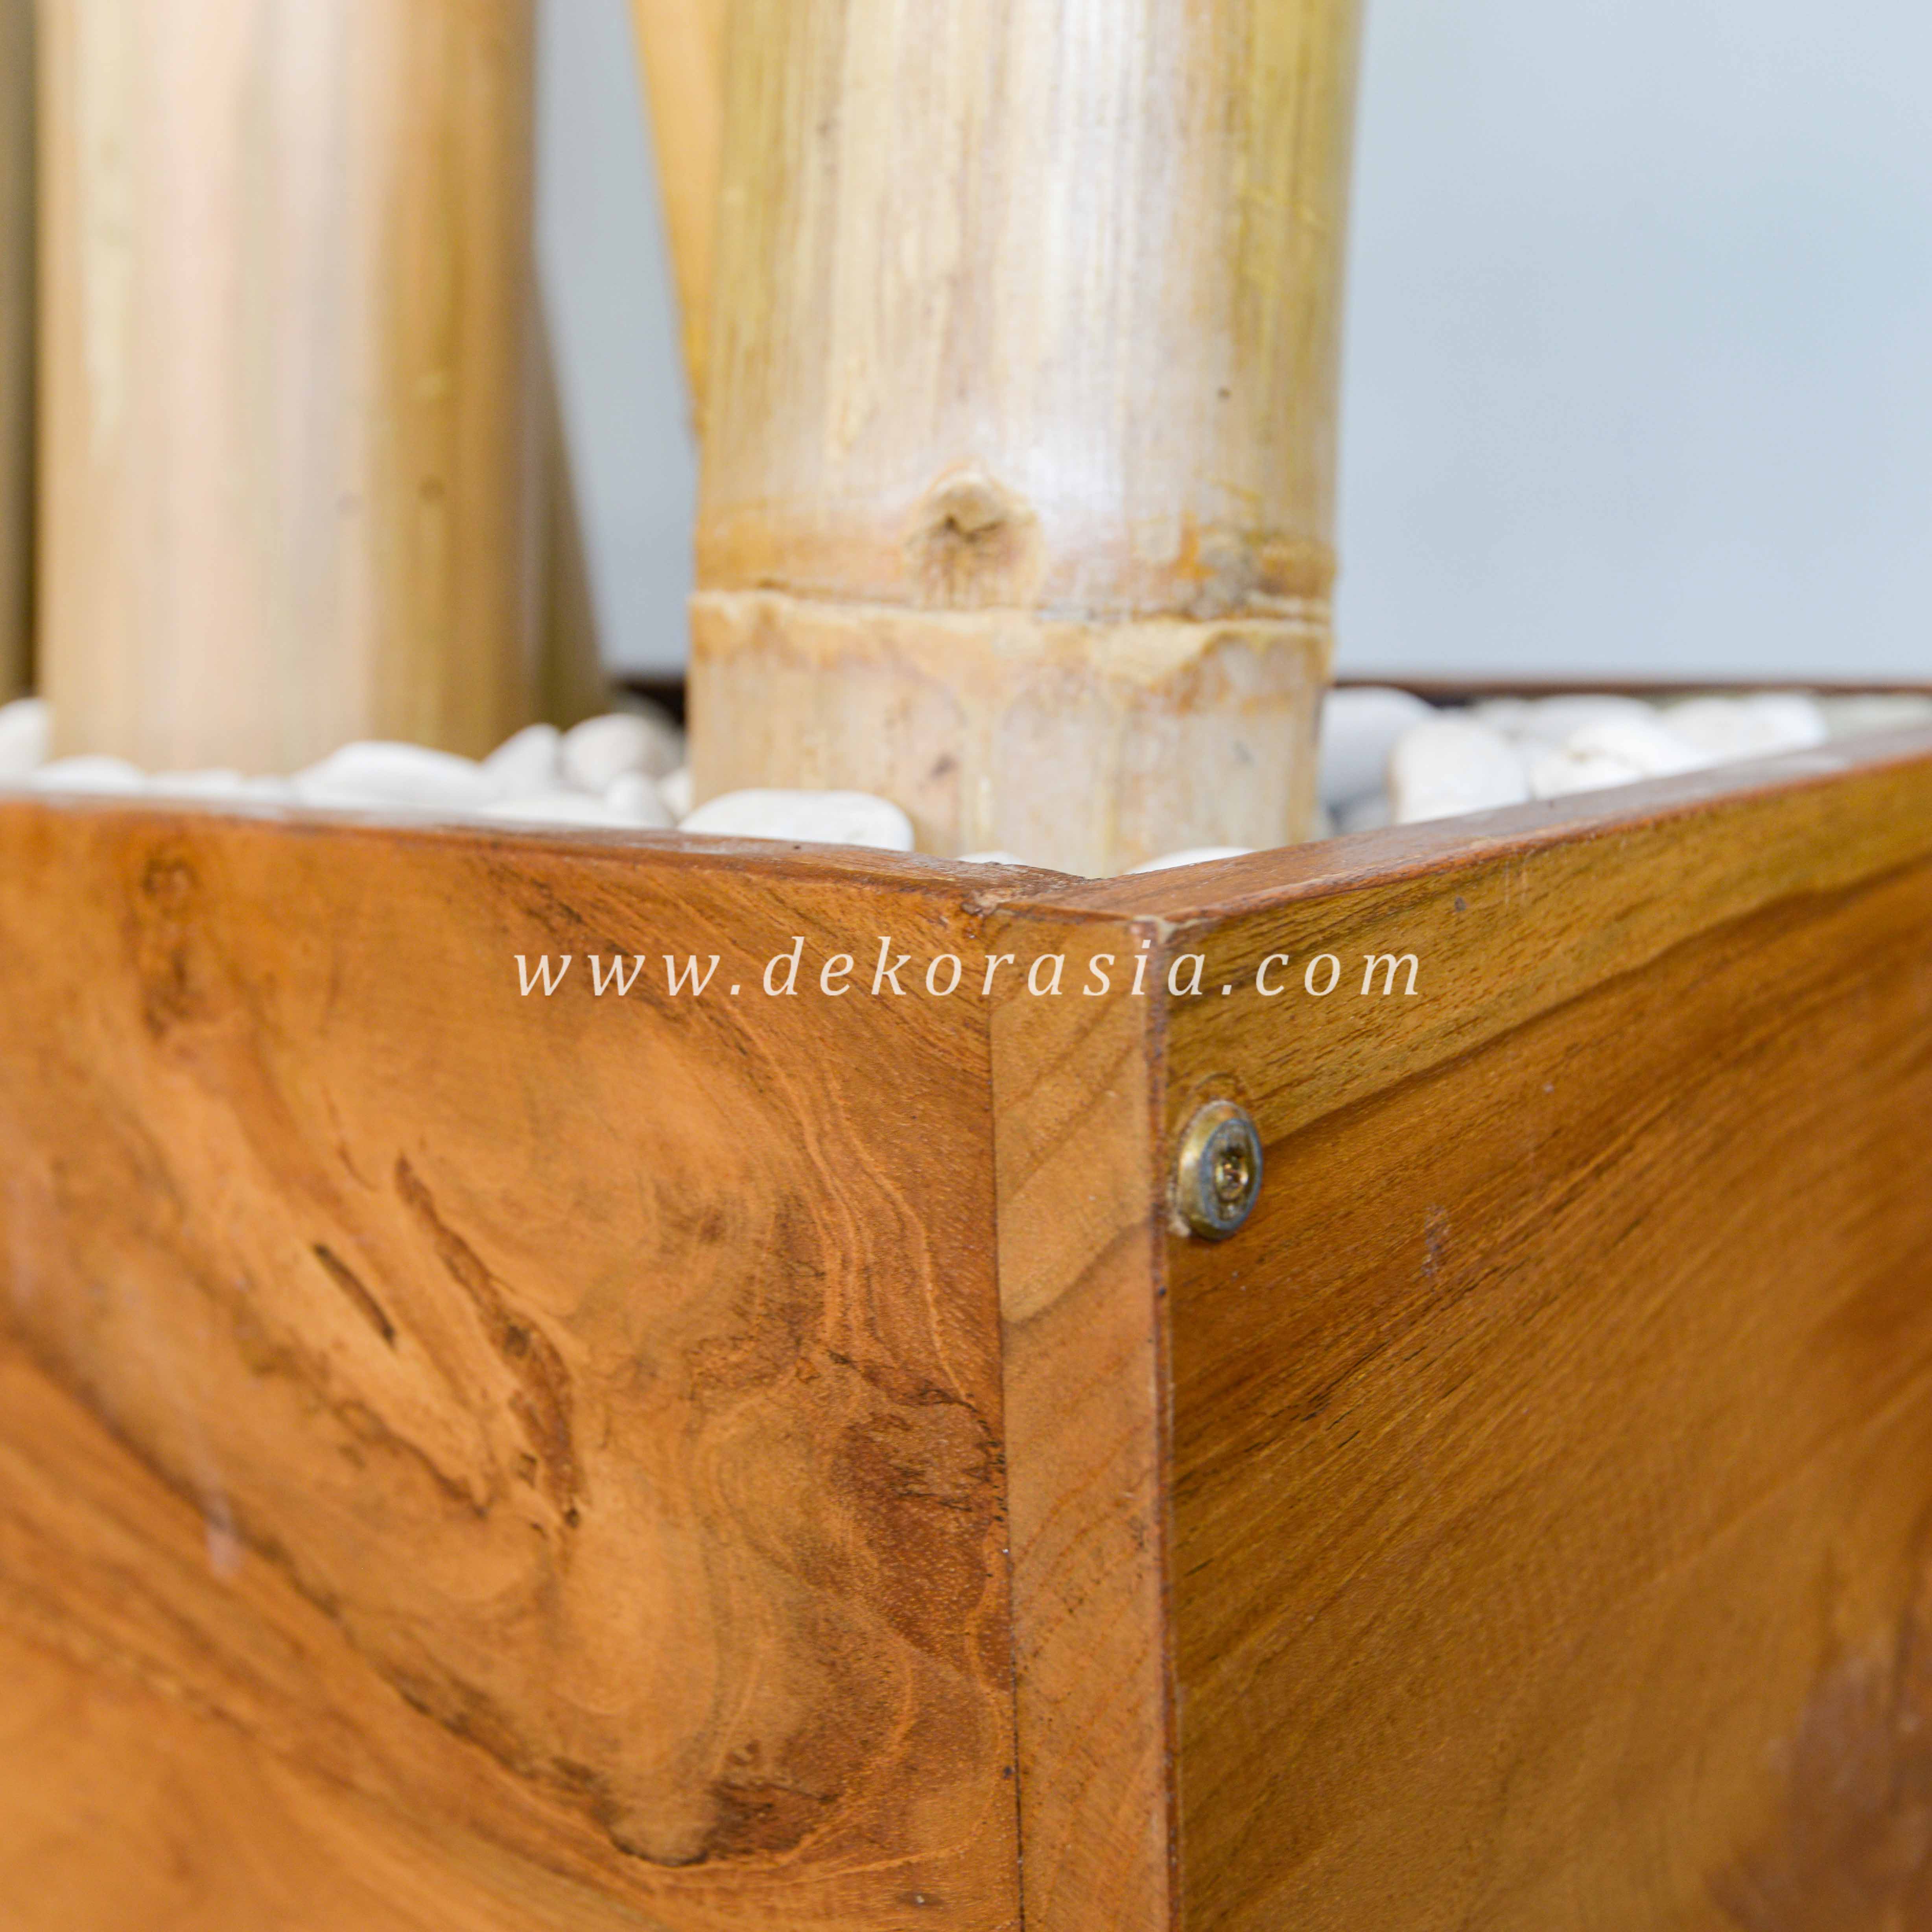 Bamboo poles on the rectangle rustic teak pot with pebbles